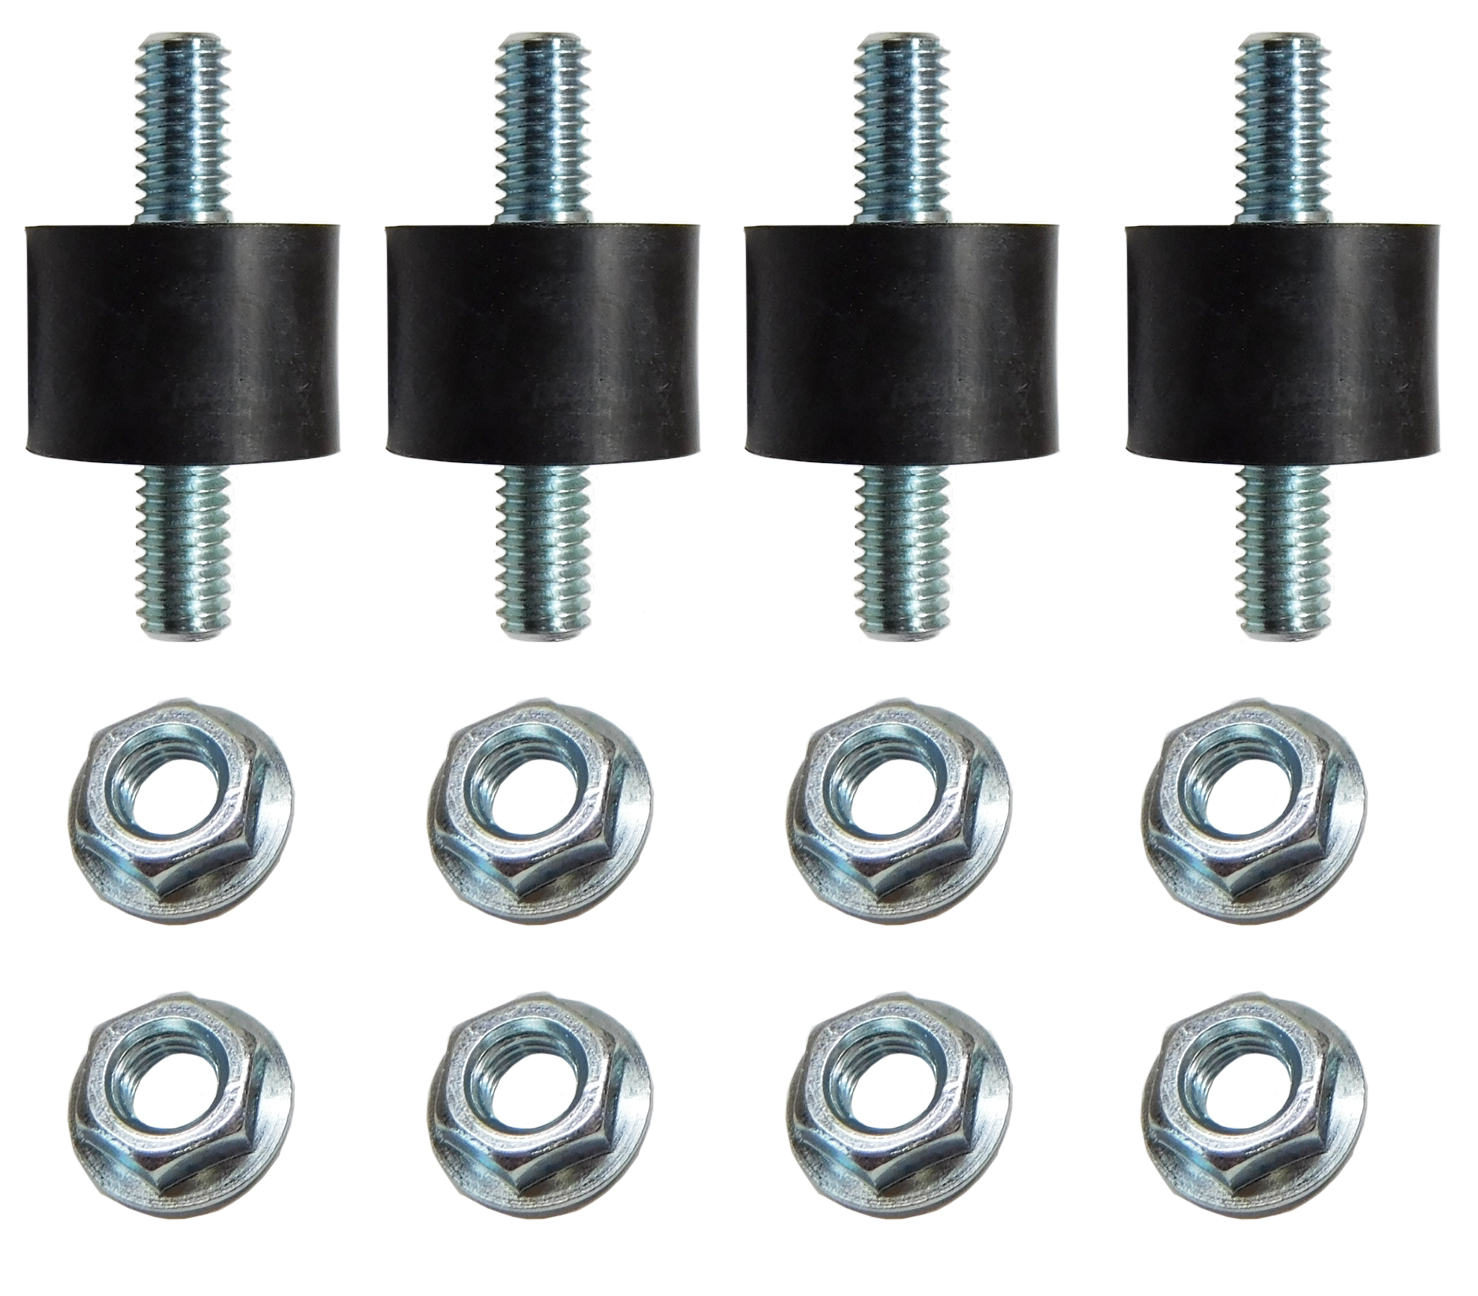 1973 Pontiac GTO/LeMans/Tempest AIR CONDITIONING MOUNTING STUD INSULATOR (THIS IS THE 3/4'' ROUND RUBBER INSULATOR WITH A 5/16'' STUD ON EACH END) - KIT (4 PIECE) | AC1234Z